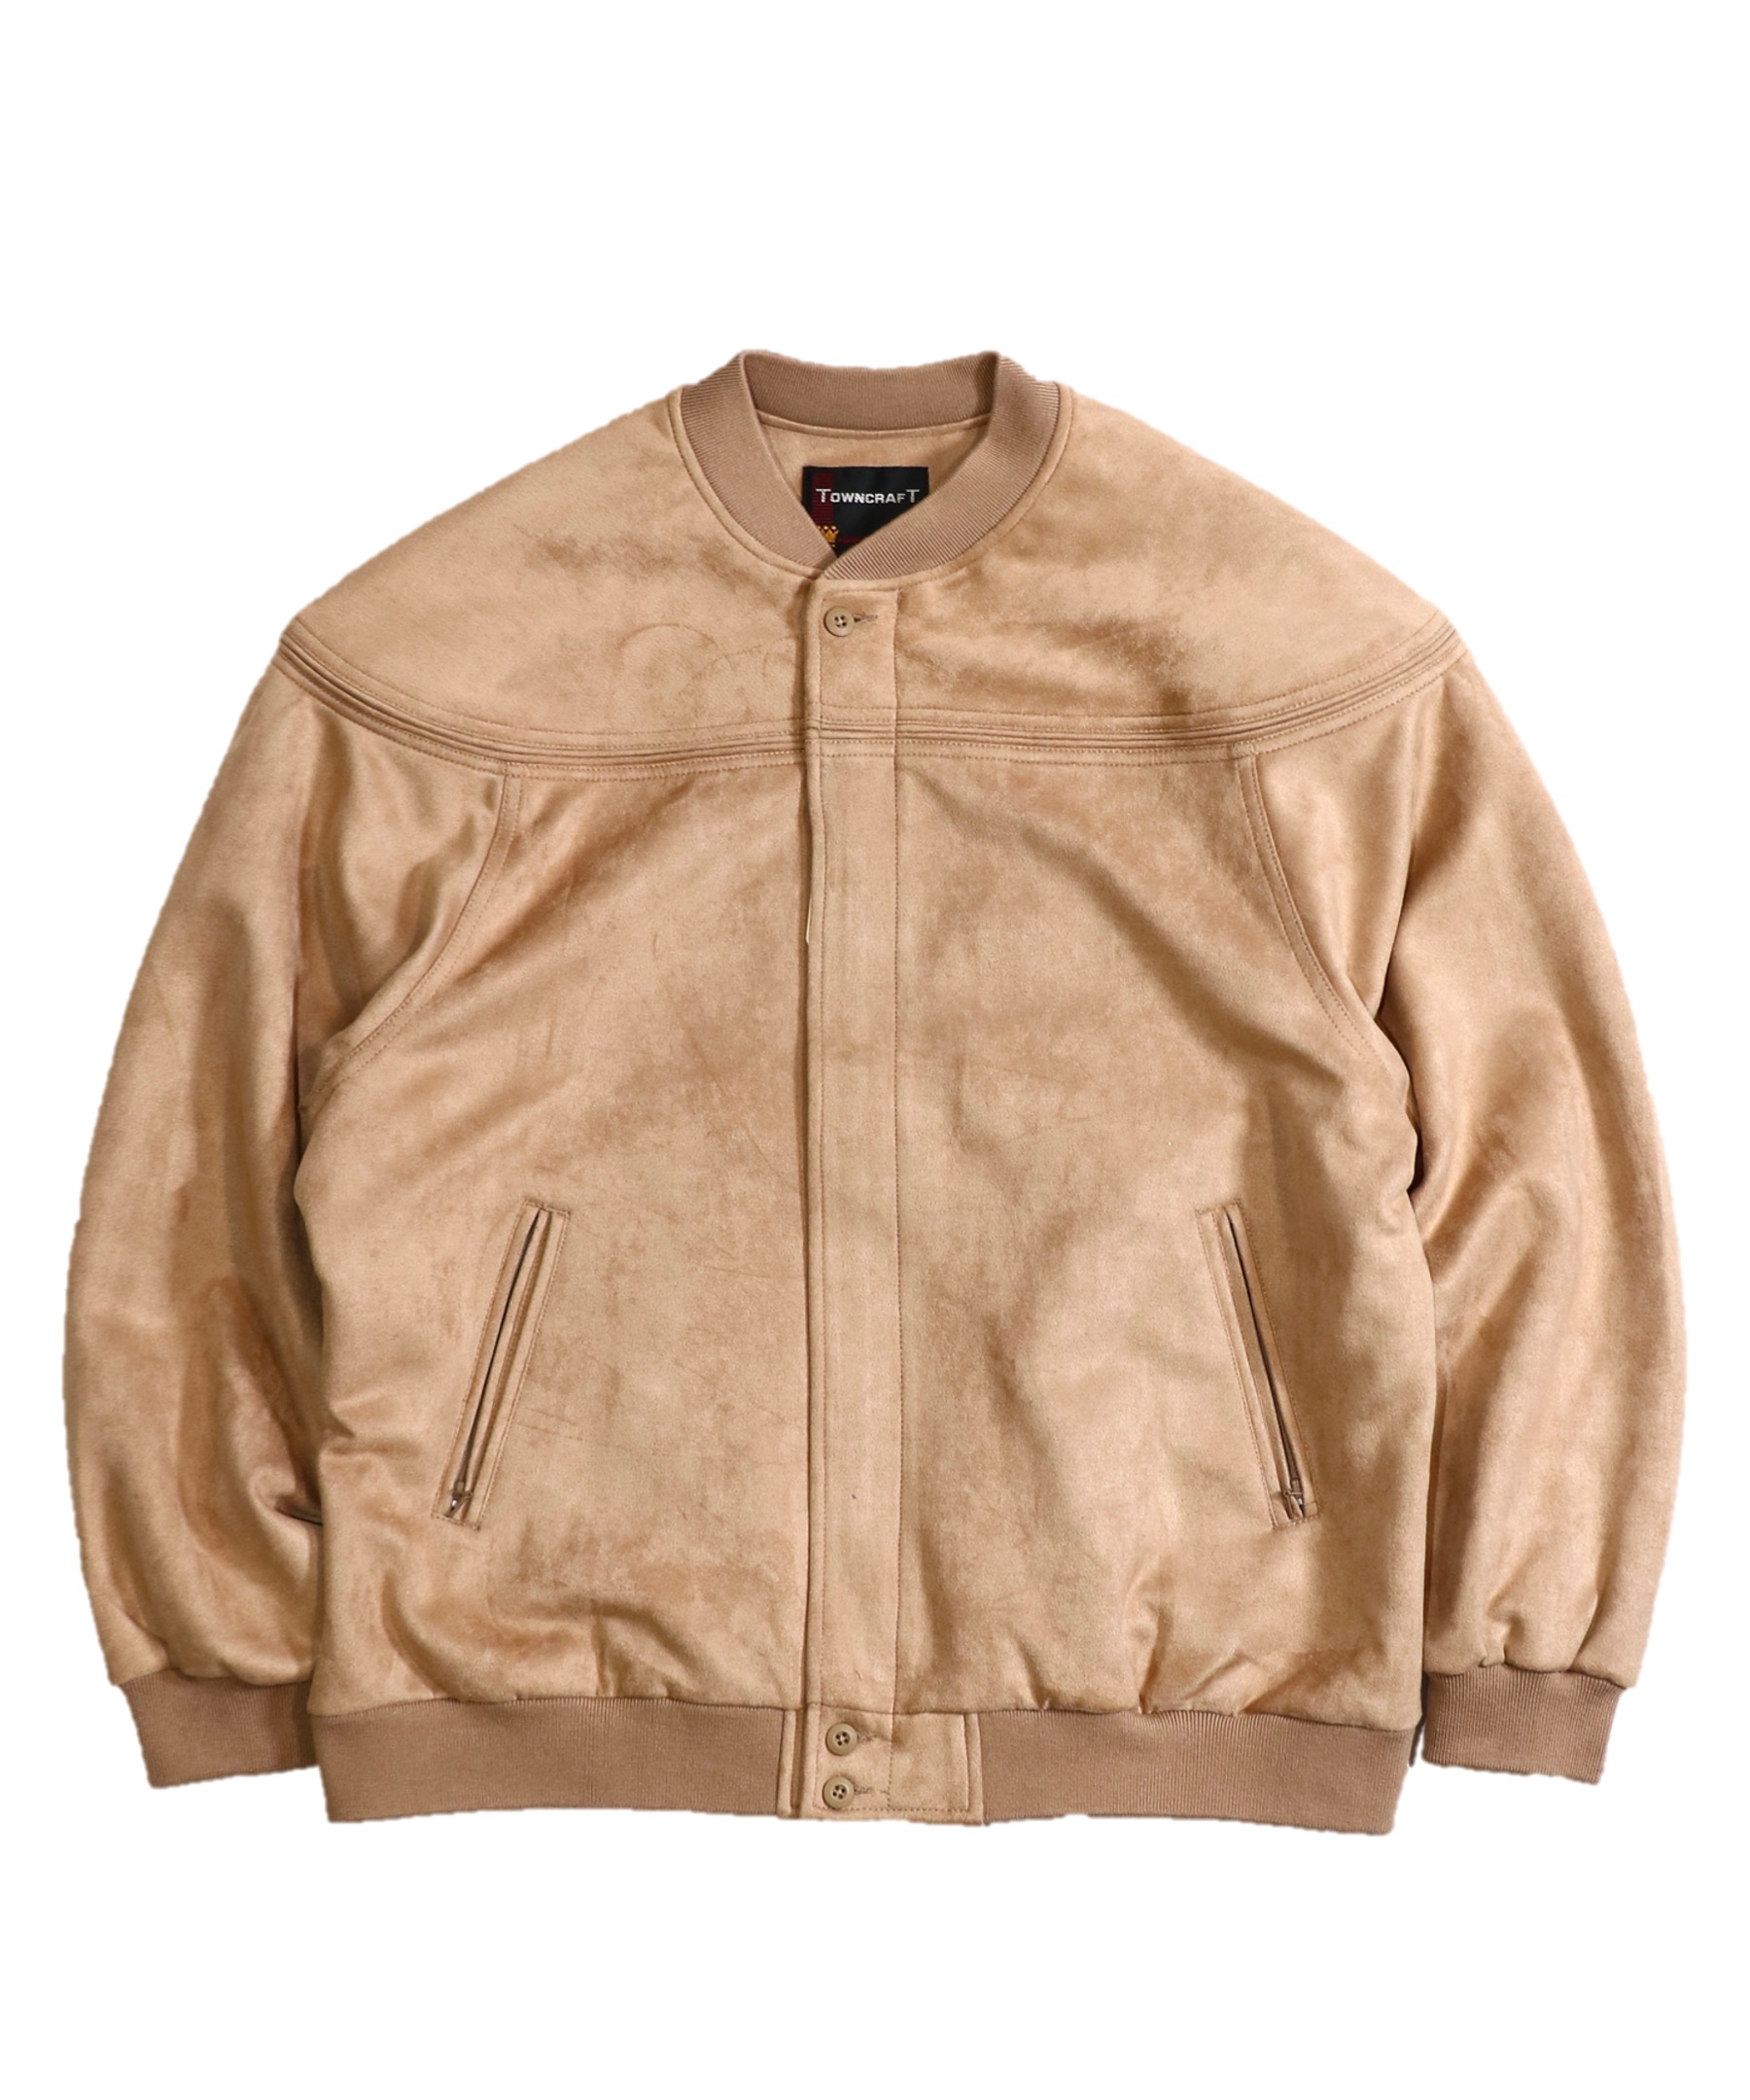 TOWNCRAFT / 90S DERBY JACKET FAKE SUEDE & CORDUROY – C.E.L.STORE NOTE